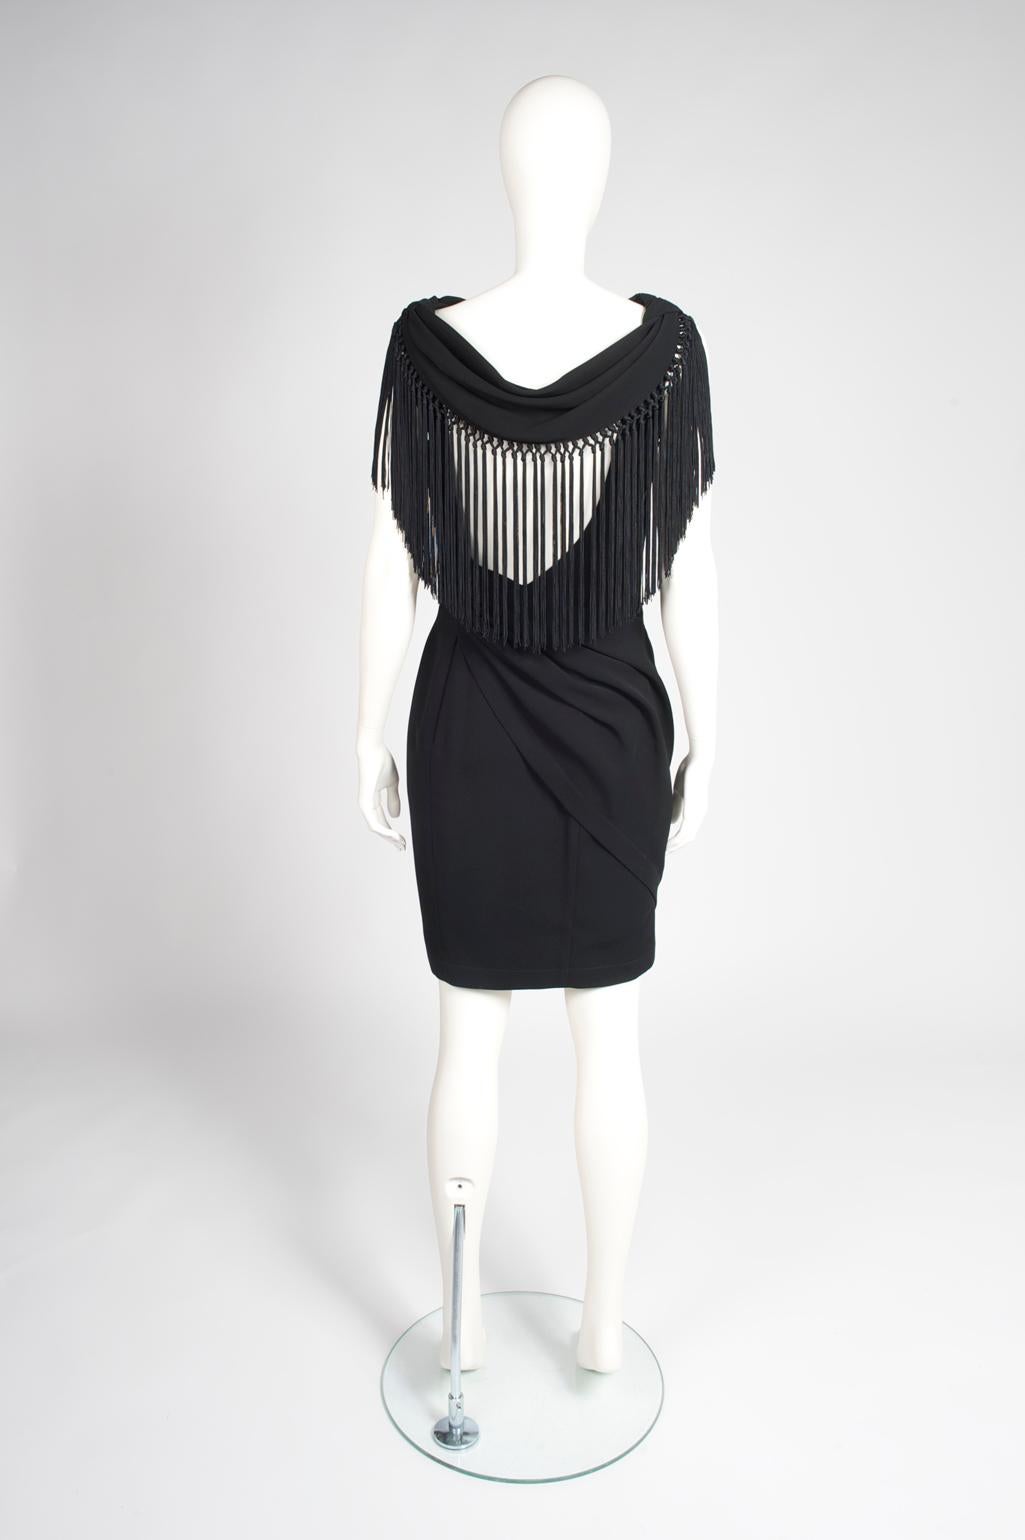 Brilliantly constructed, this 90s Thierry Mugler is a wonderful example of his work. Cut from soft black viscose, the dress is artfully draped and gathered to produce a wrapping effect around the body, beautifully emphasizing feminine curves.